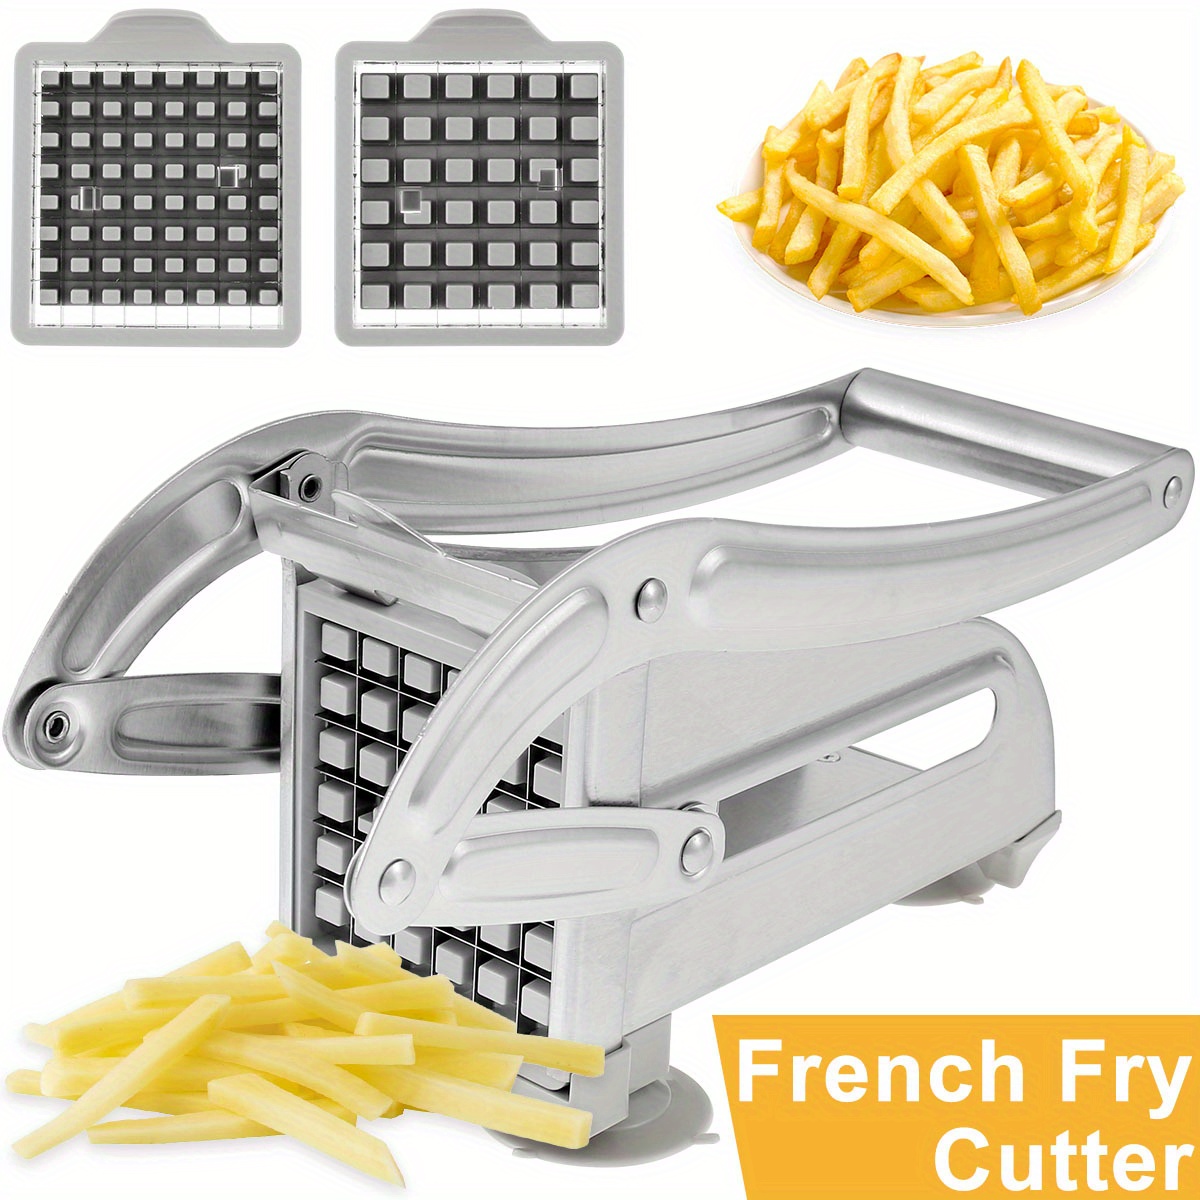 https://img.kwcdn.com/product/french-fry-cutter/d69d2f15w98k18-7502a03c/open/2023-11-28/1701141374606-ab3d2f69e9624f0993cd830960d5439f-goods.jpeg